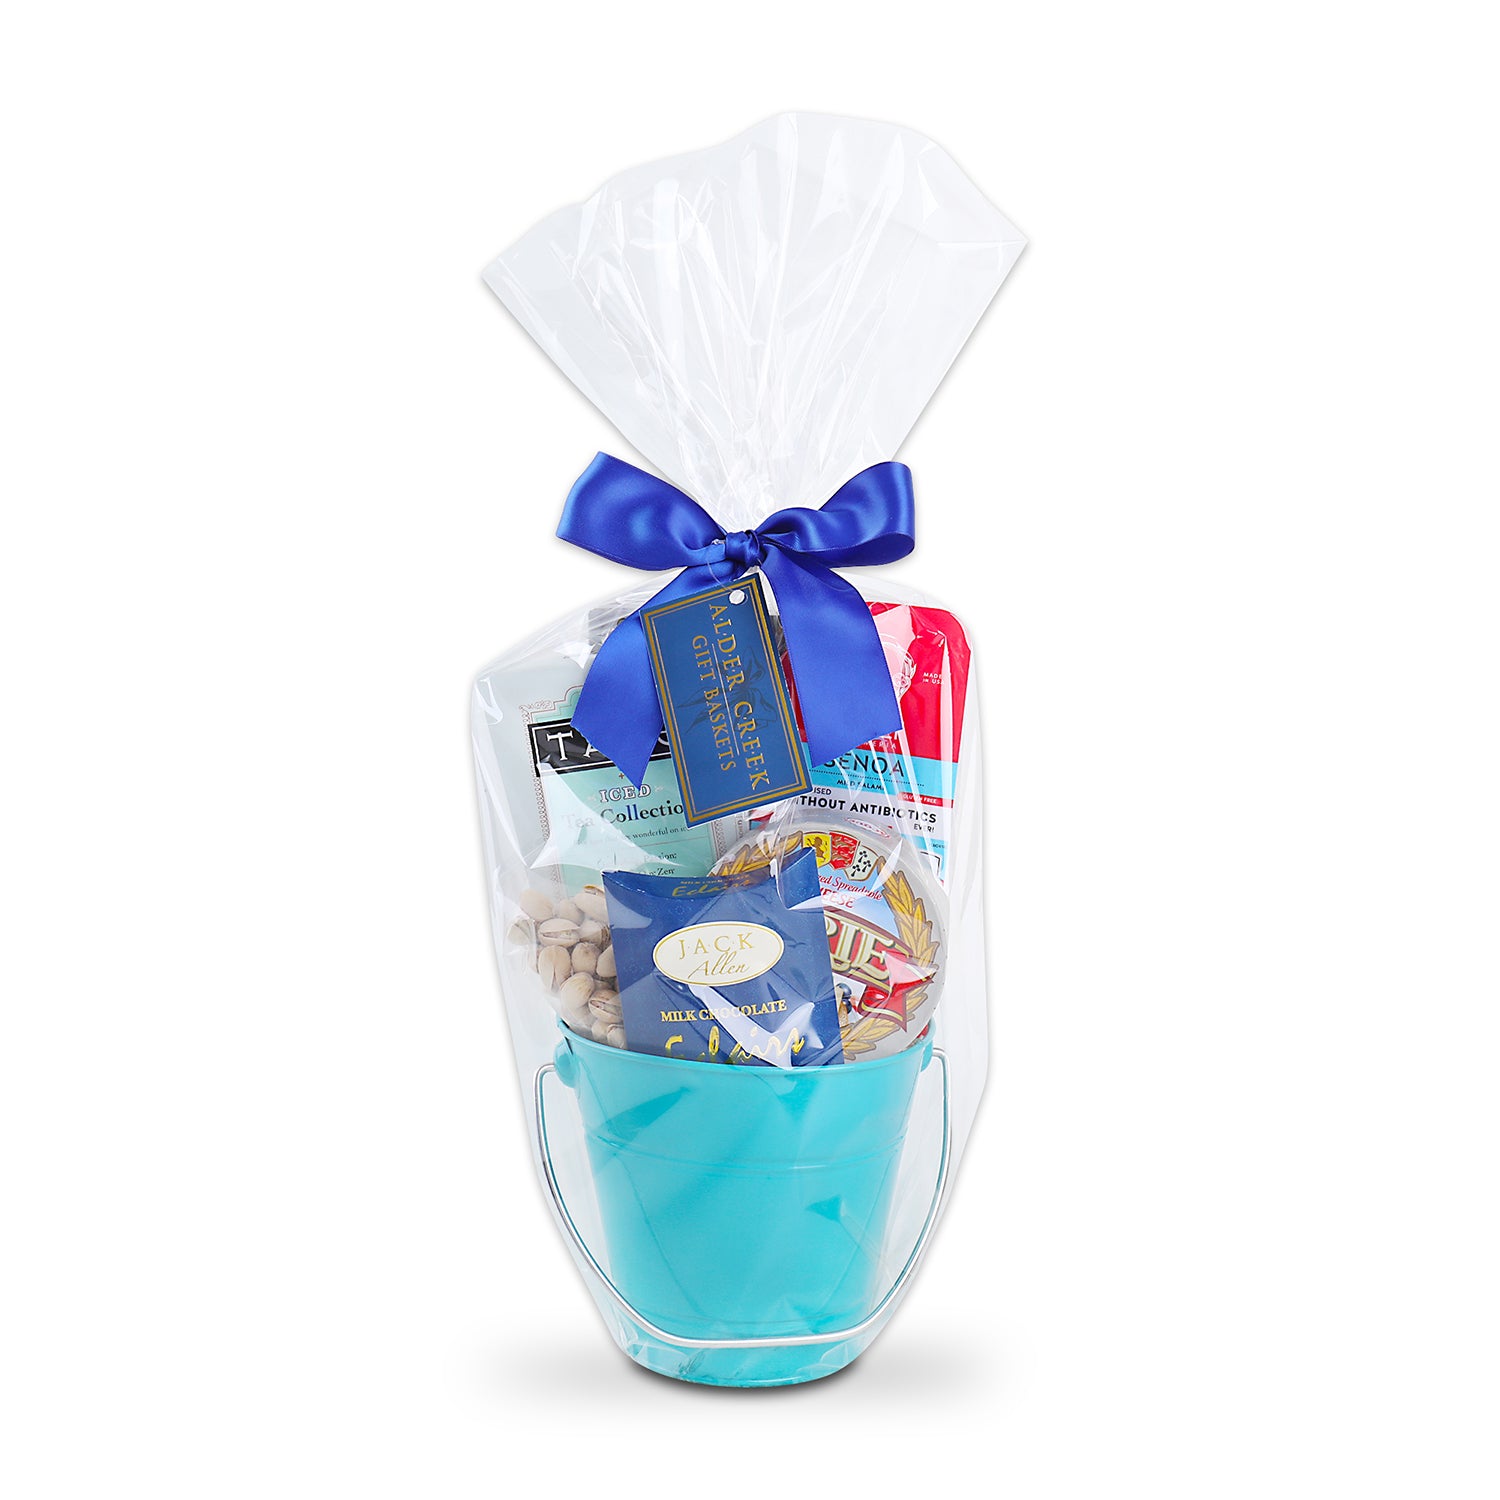 Gift basket wrappled in plastic and tied with blue bow